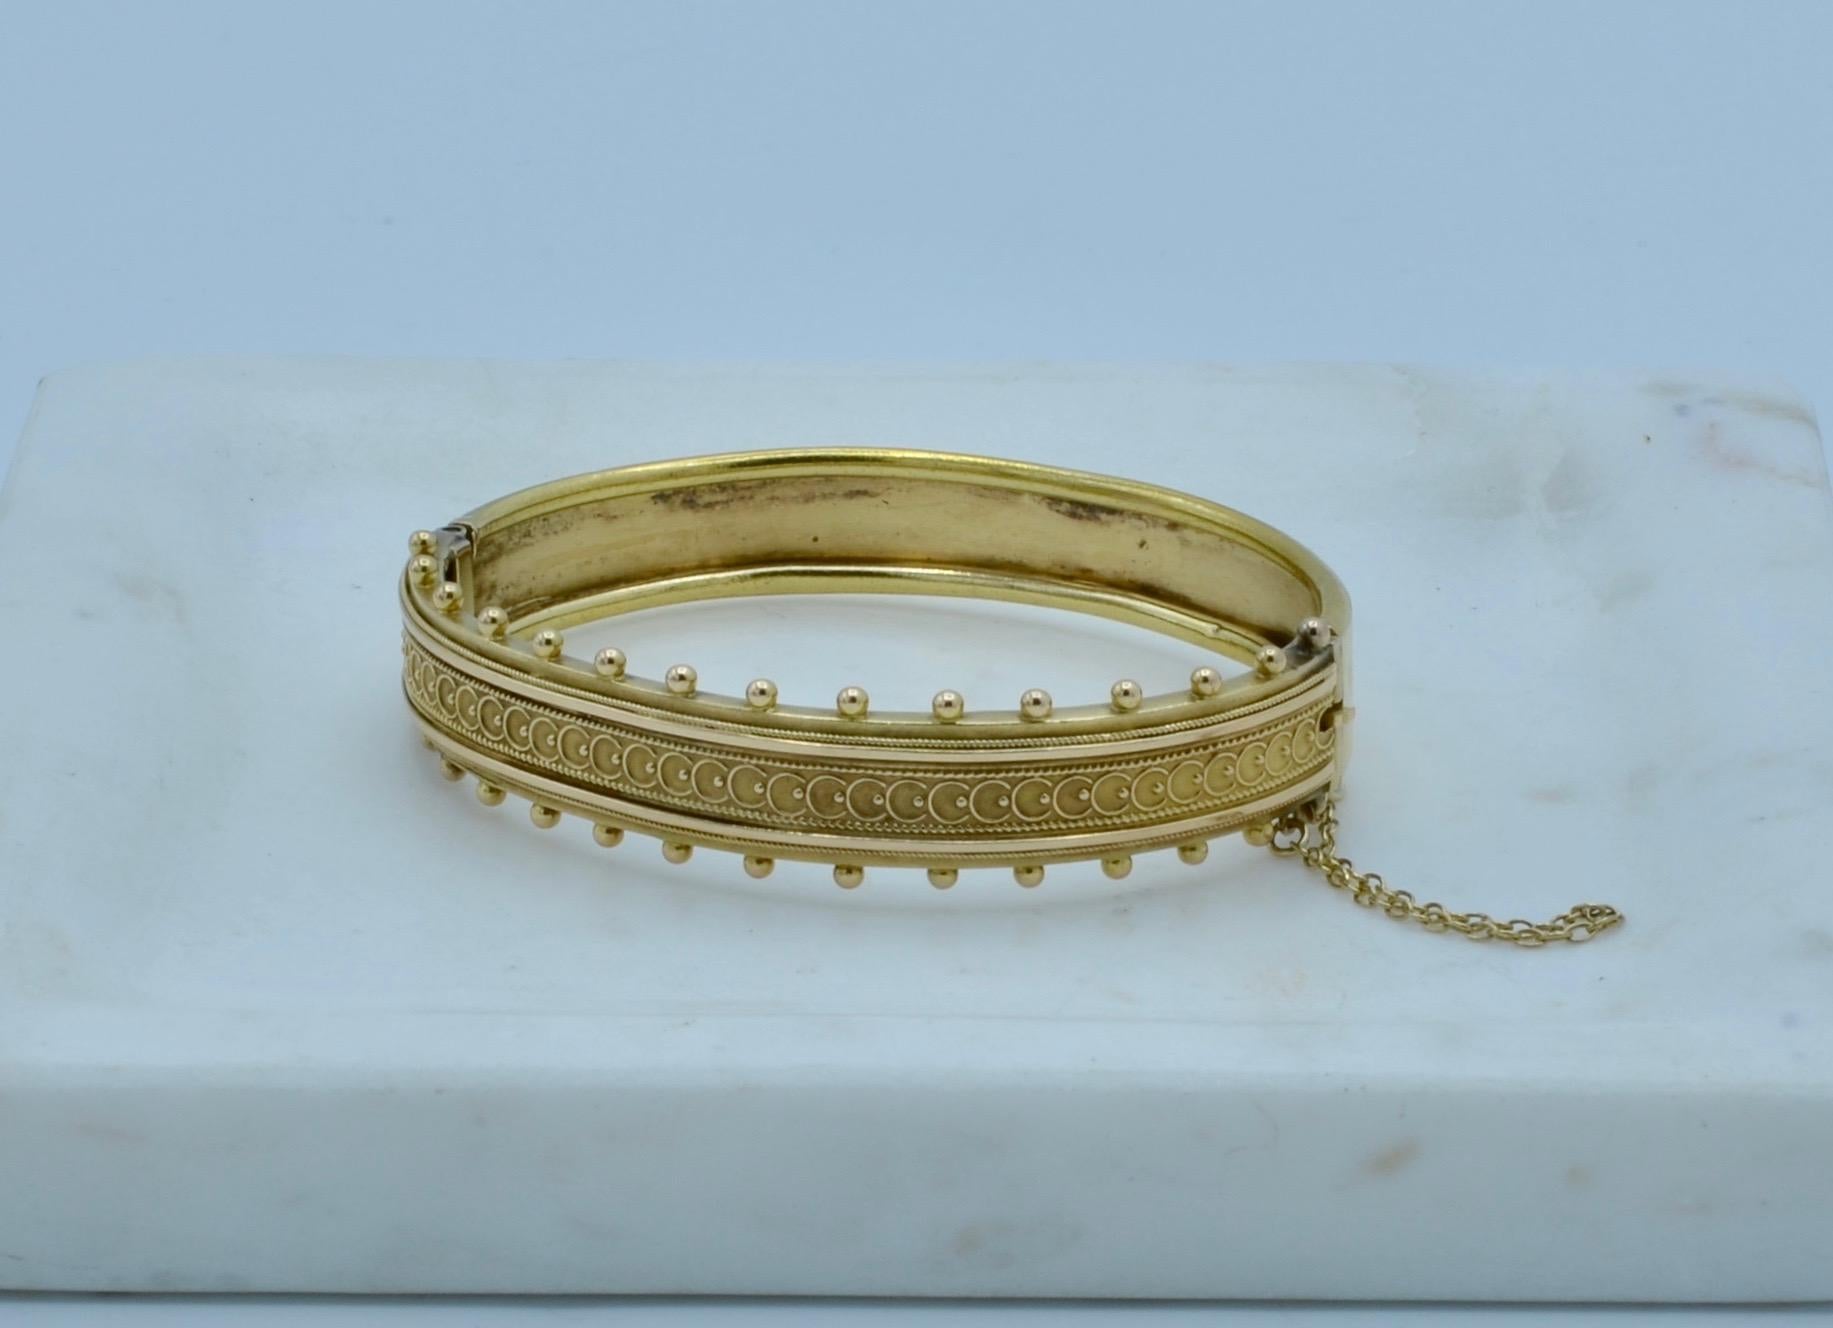 This lovely bracelet is intricately detailed with a lace pattern that extends out in tiny uniformly spaced balls. It gives the bracelet an illusion of dept and three dimension as the back is smooth gold.It is a unique and comfortable bracelet you